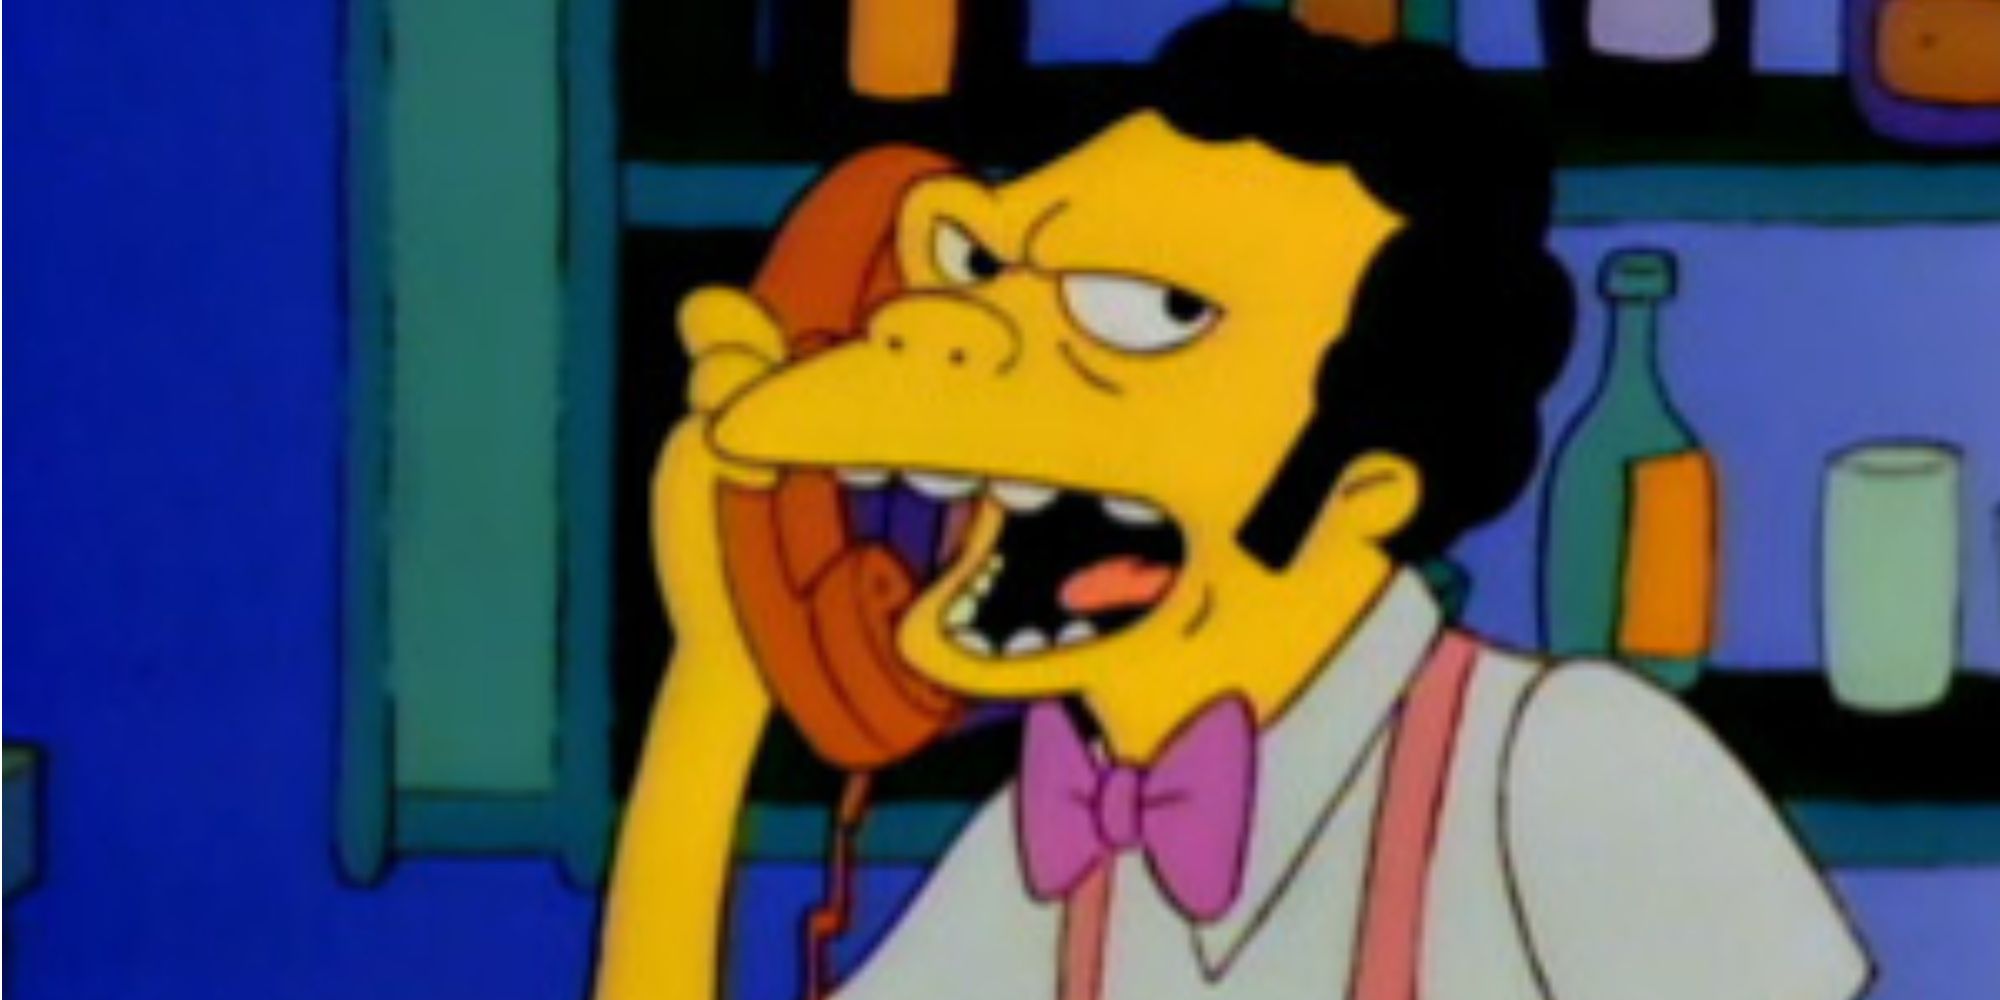 Moe answers the phone I.P. Freely Prank Call in The Simpsons